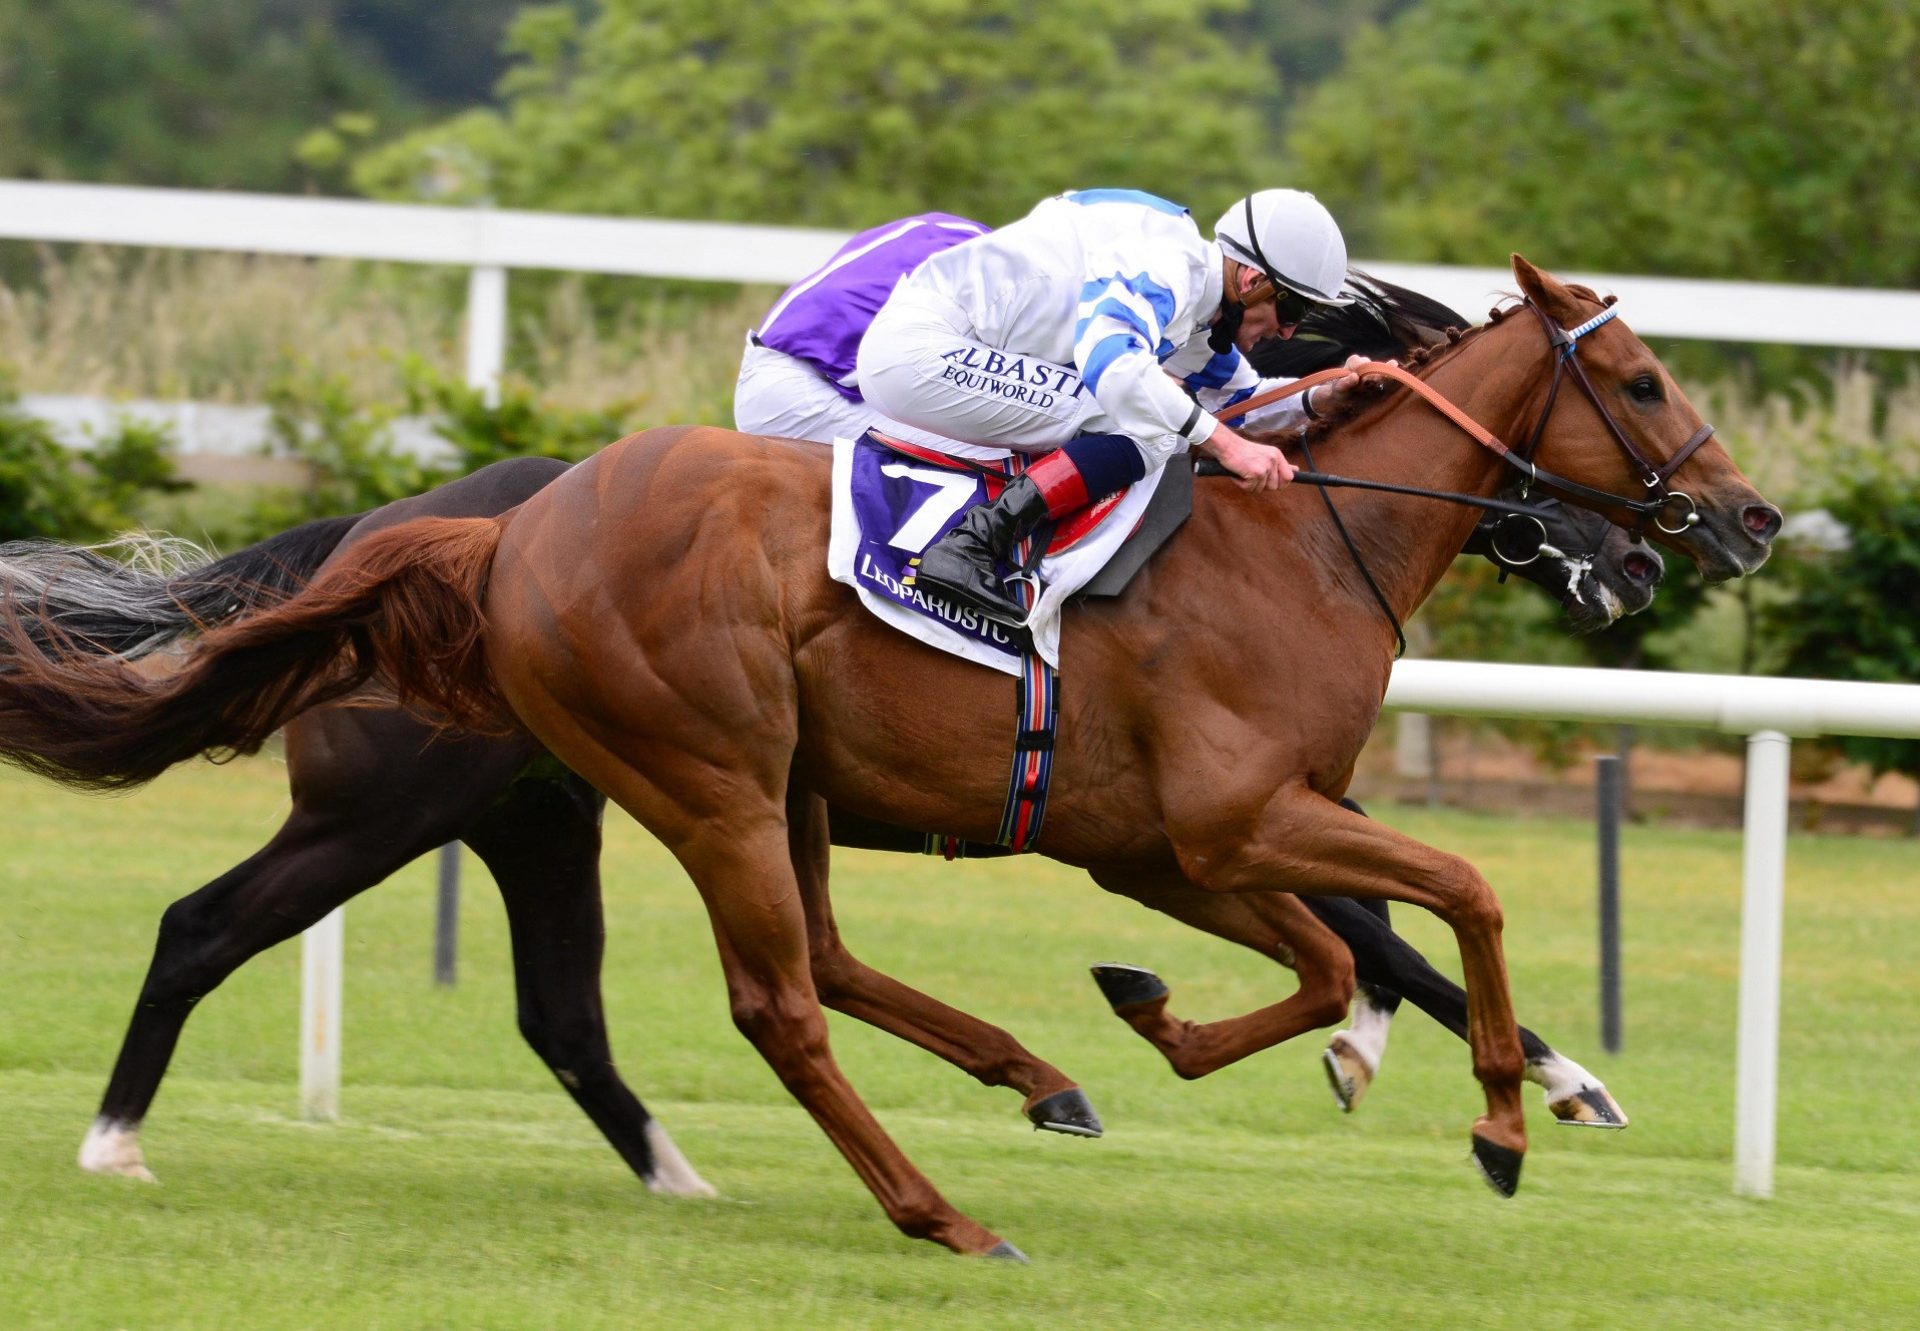 Ten Year Ticket (Rock Of Gibraltar) winning the Listed Trial Stakes at Leopardstown